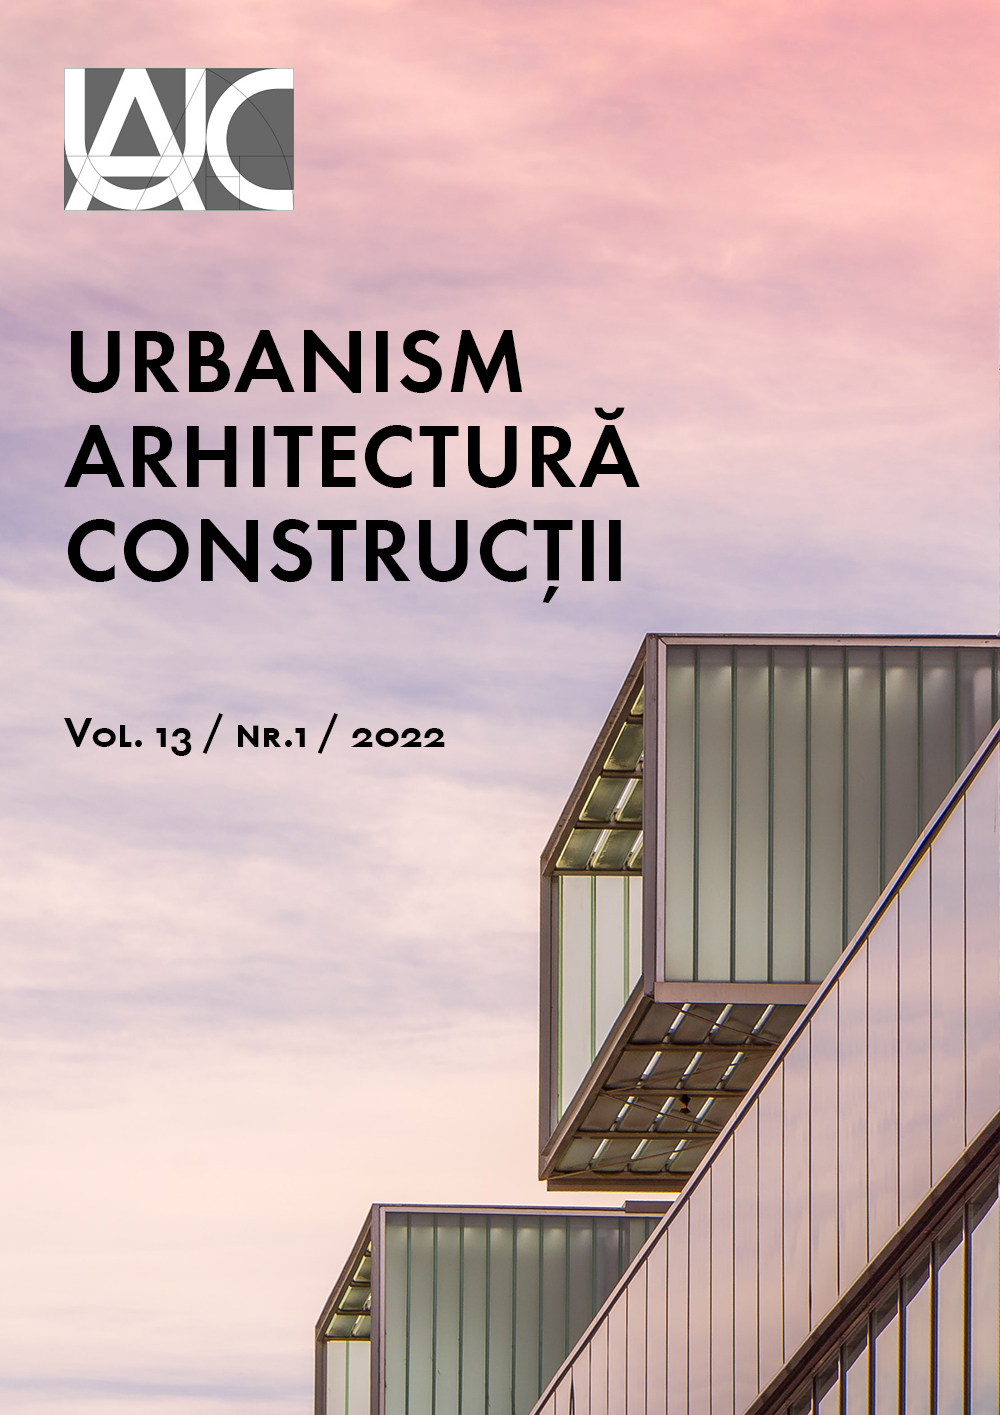 Answer to the complaints against the article “On urban safety in the occident: Some relevant observations”, T. Kauko, Urbanism Architecture Constructions 12(1): 67-72